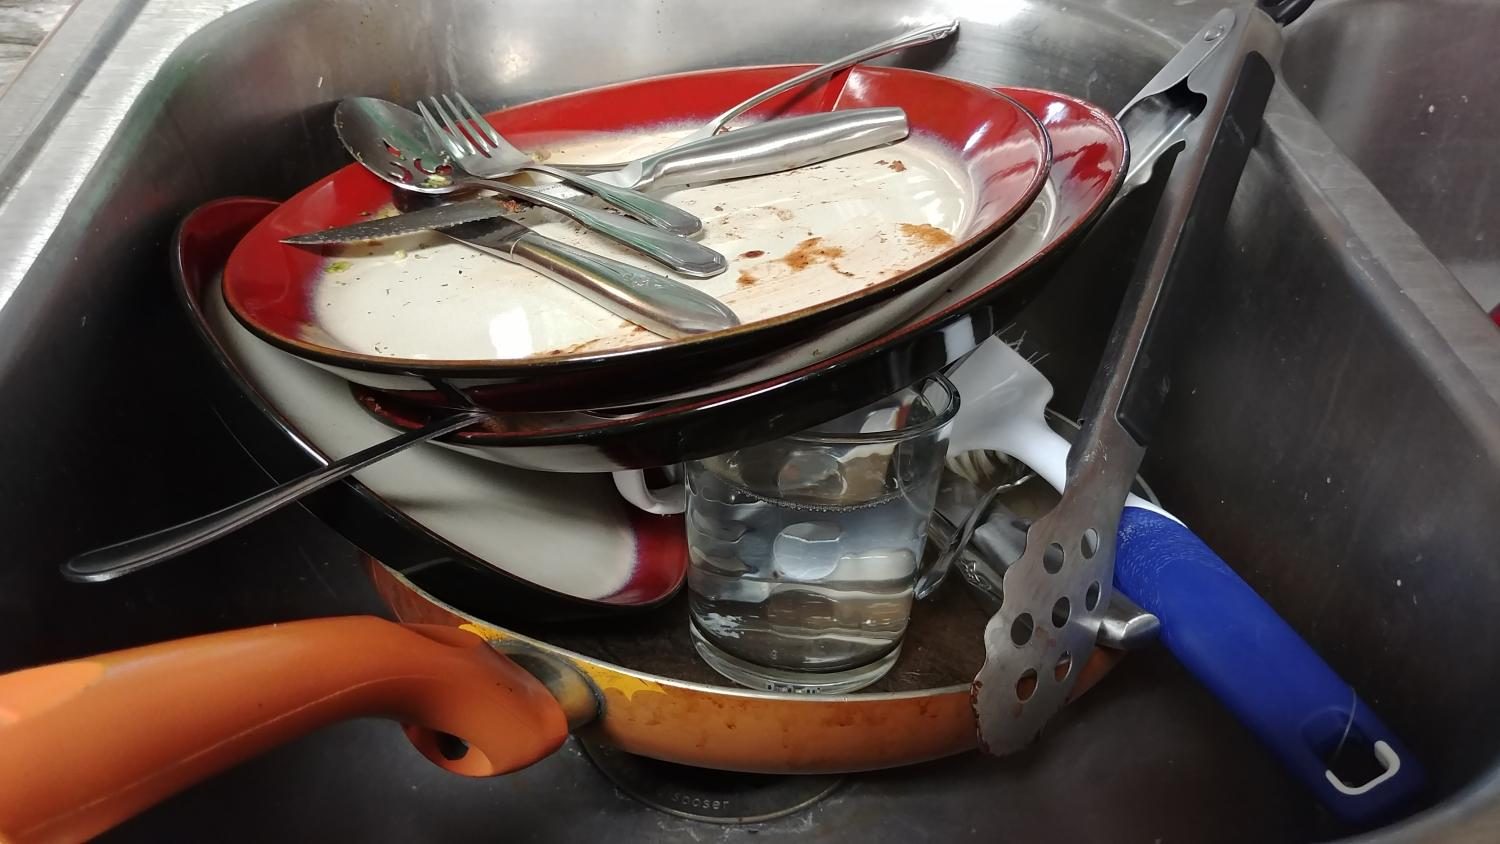 Dirty dishes pile up